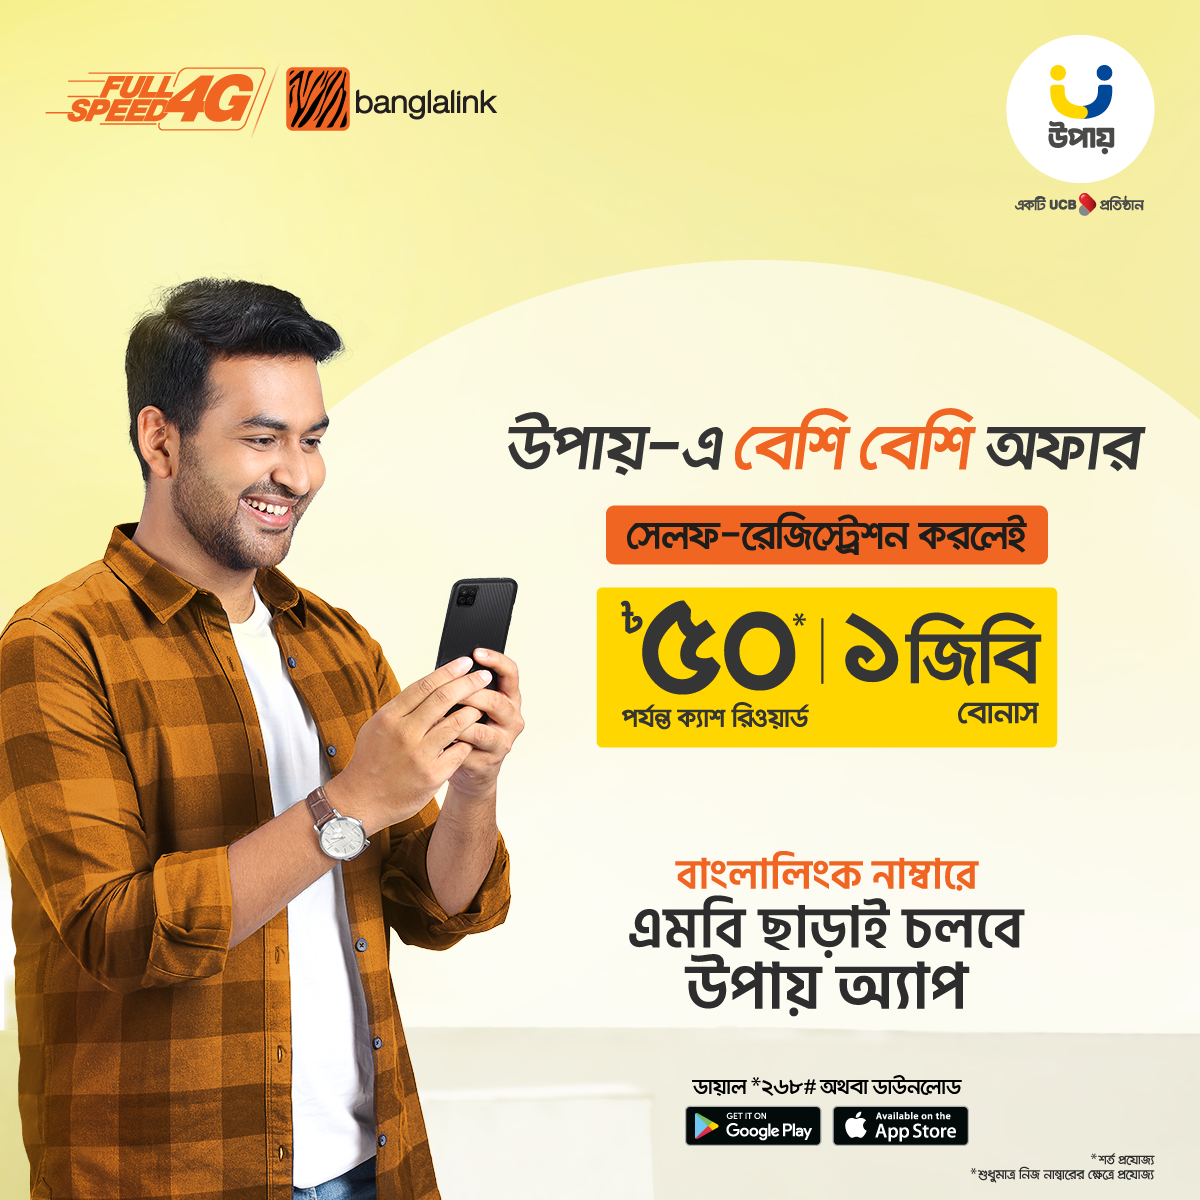 No data cost to use upay app by Banglalink customers